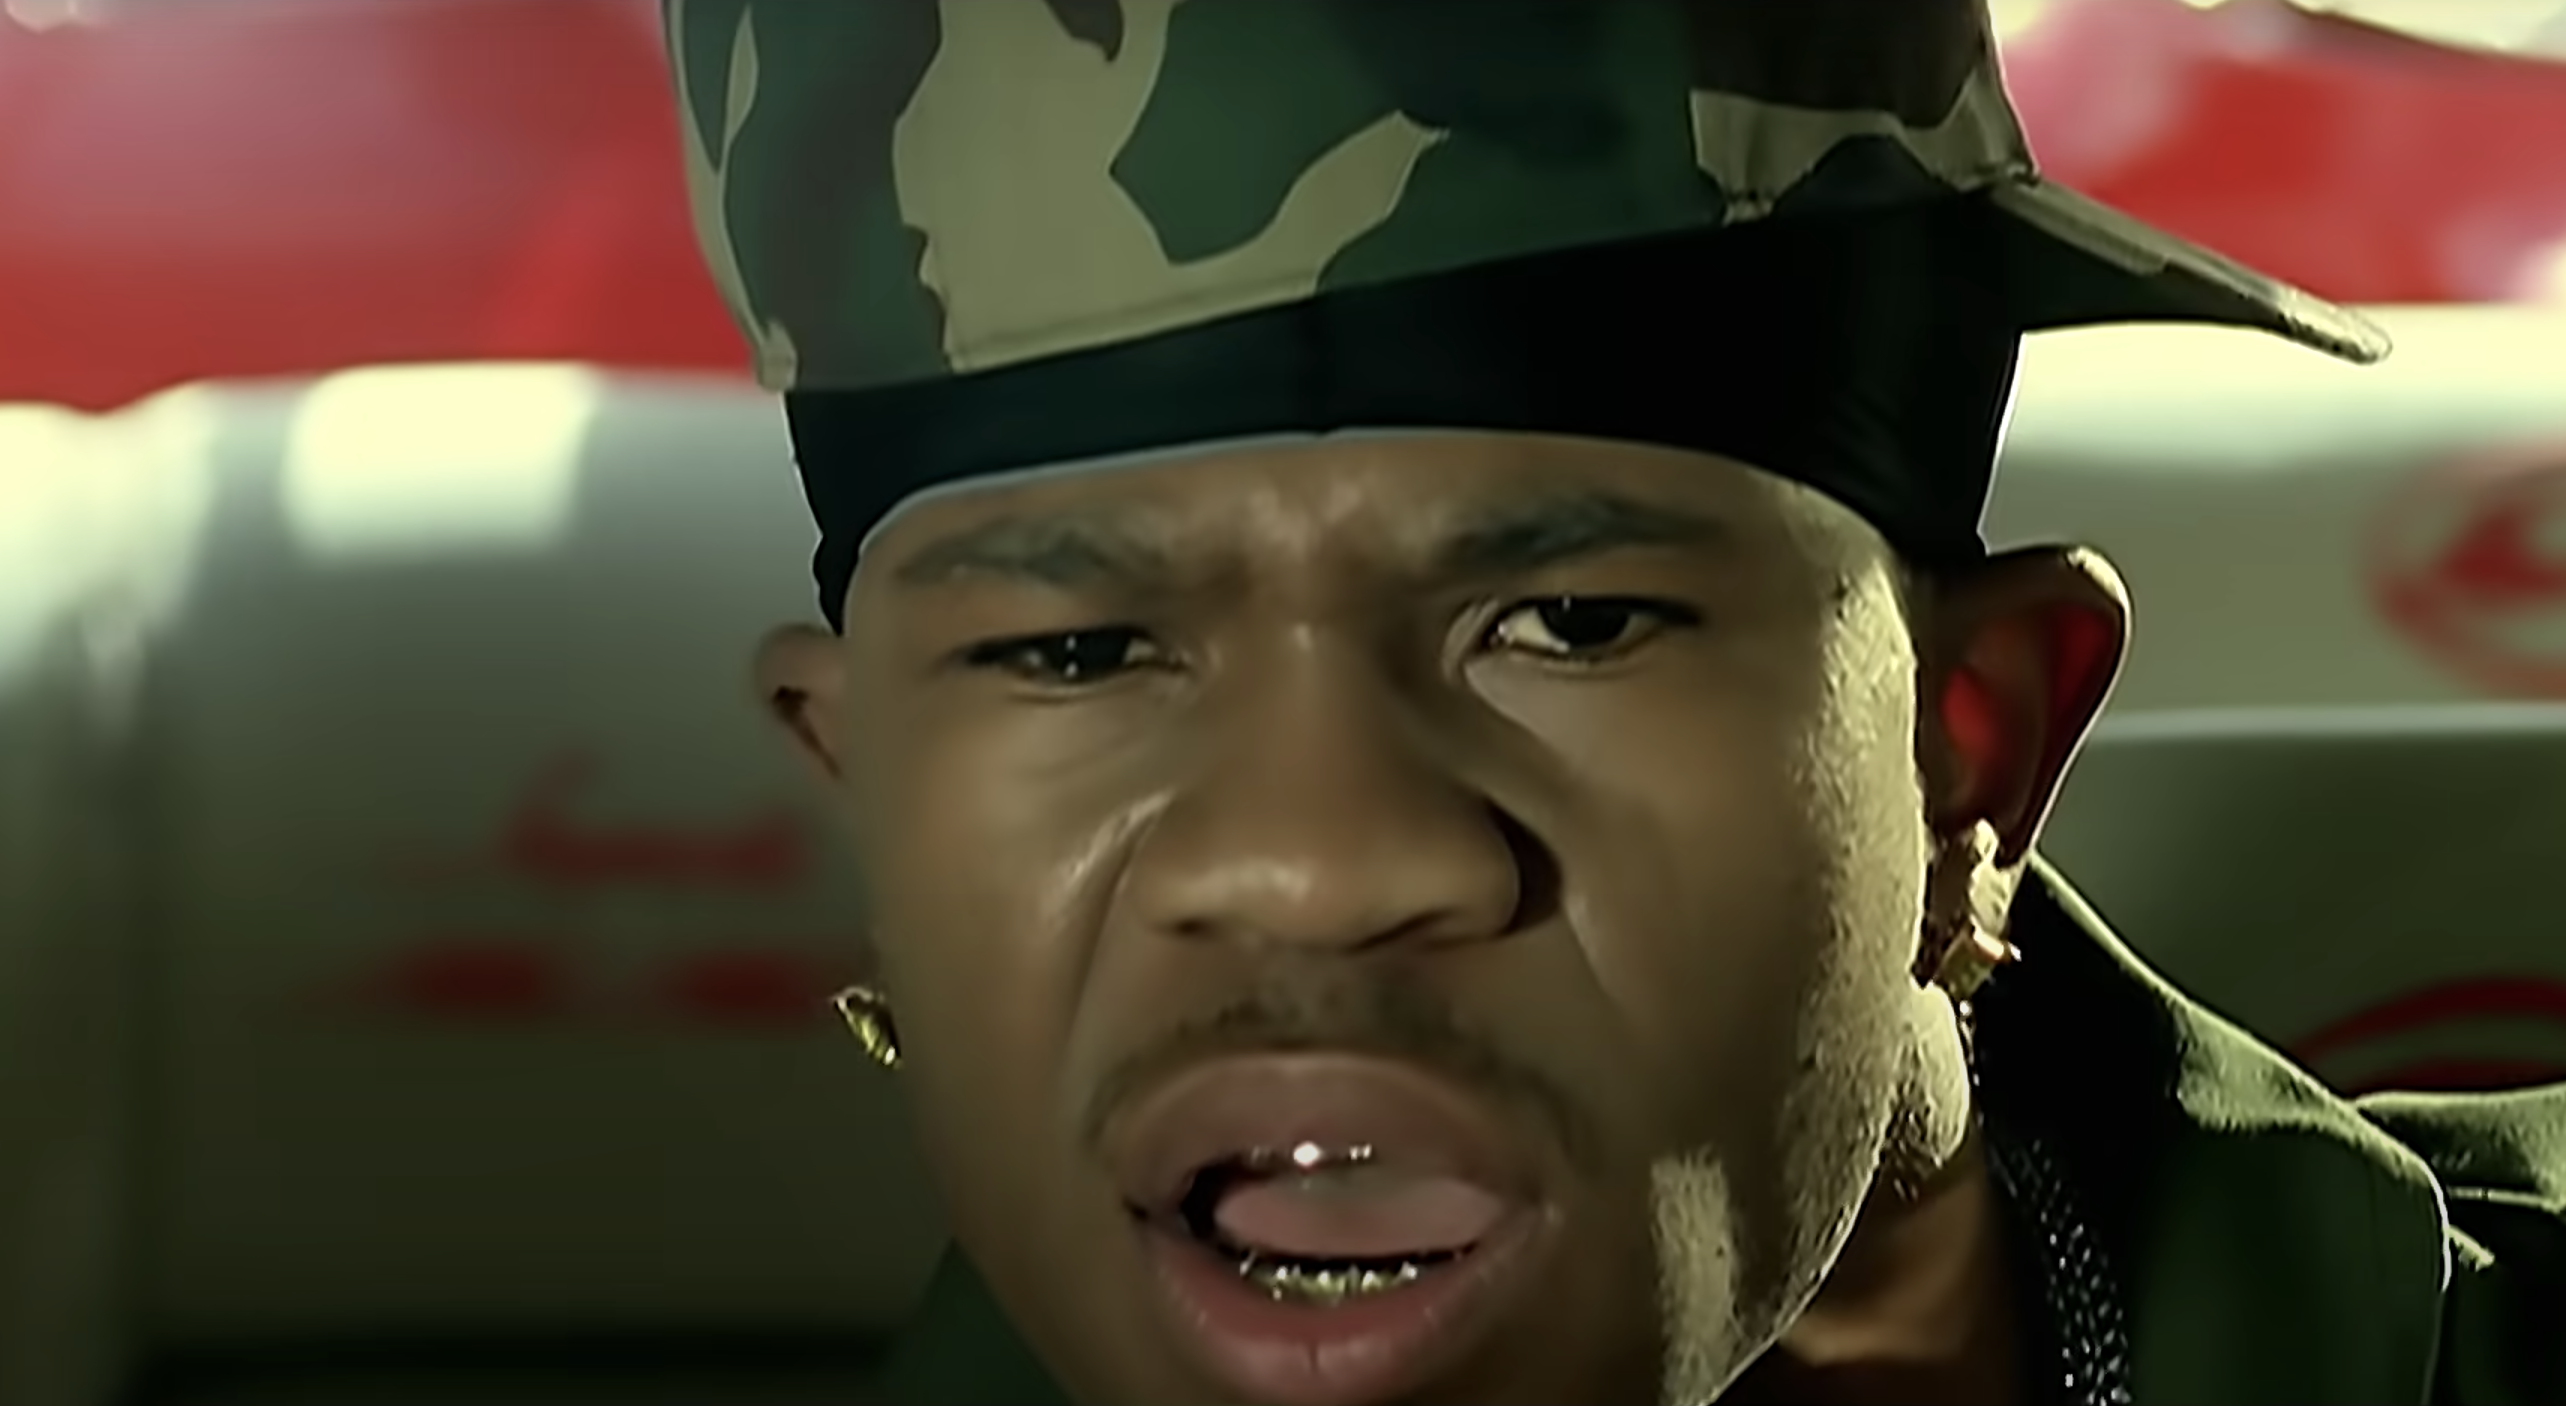 Chamillionaire rapping in a camouflage hat